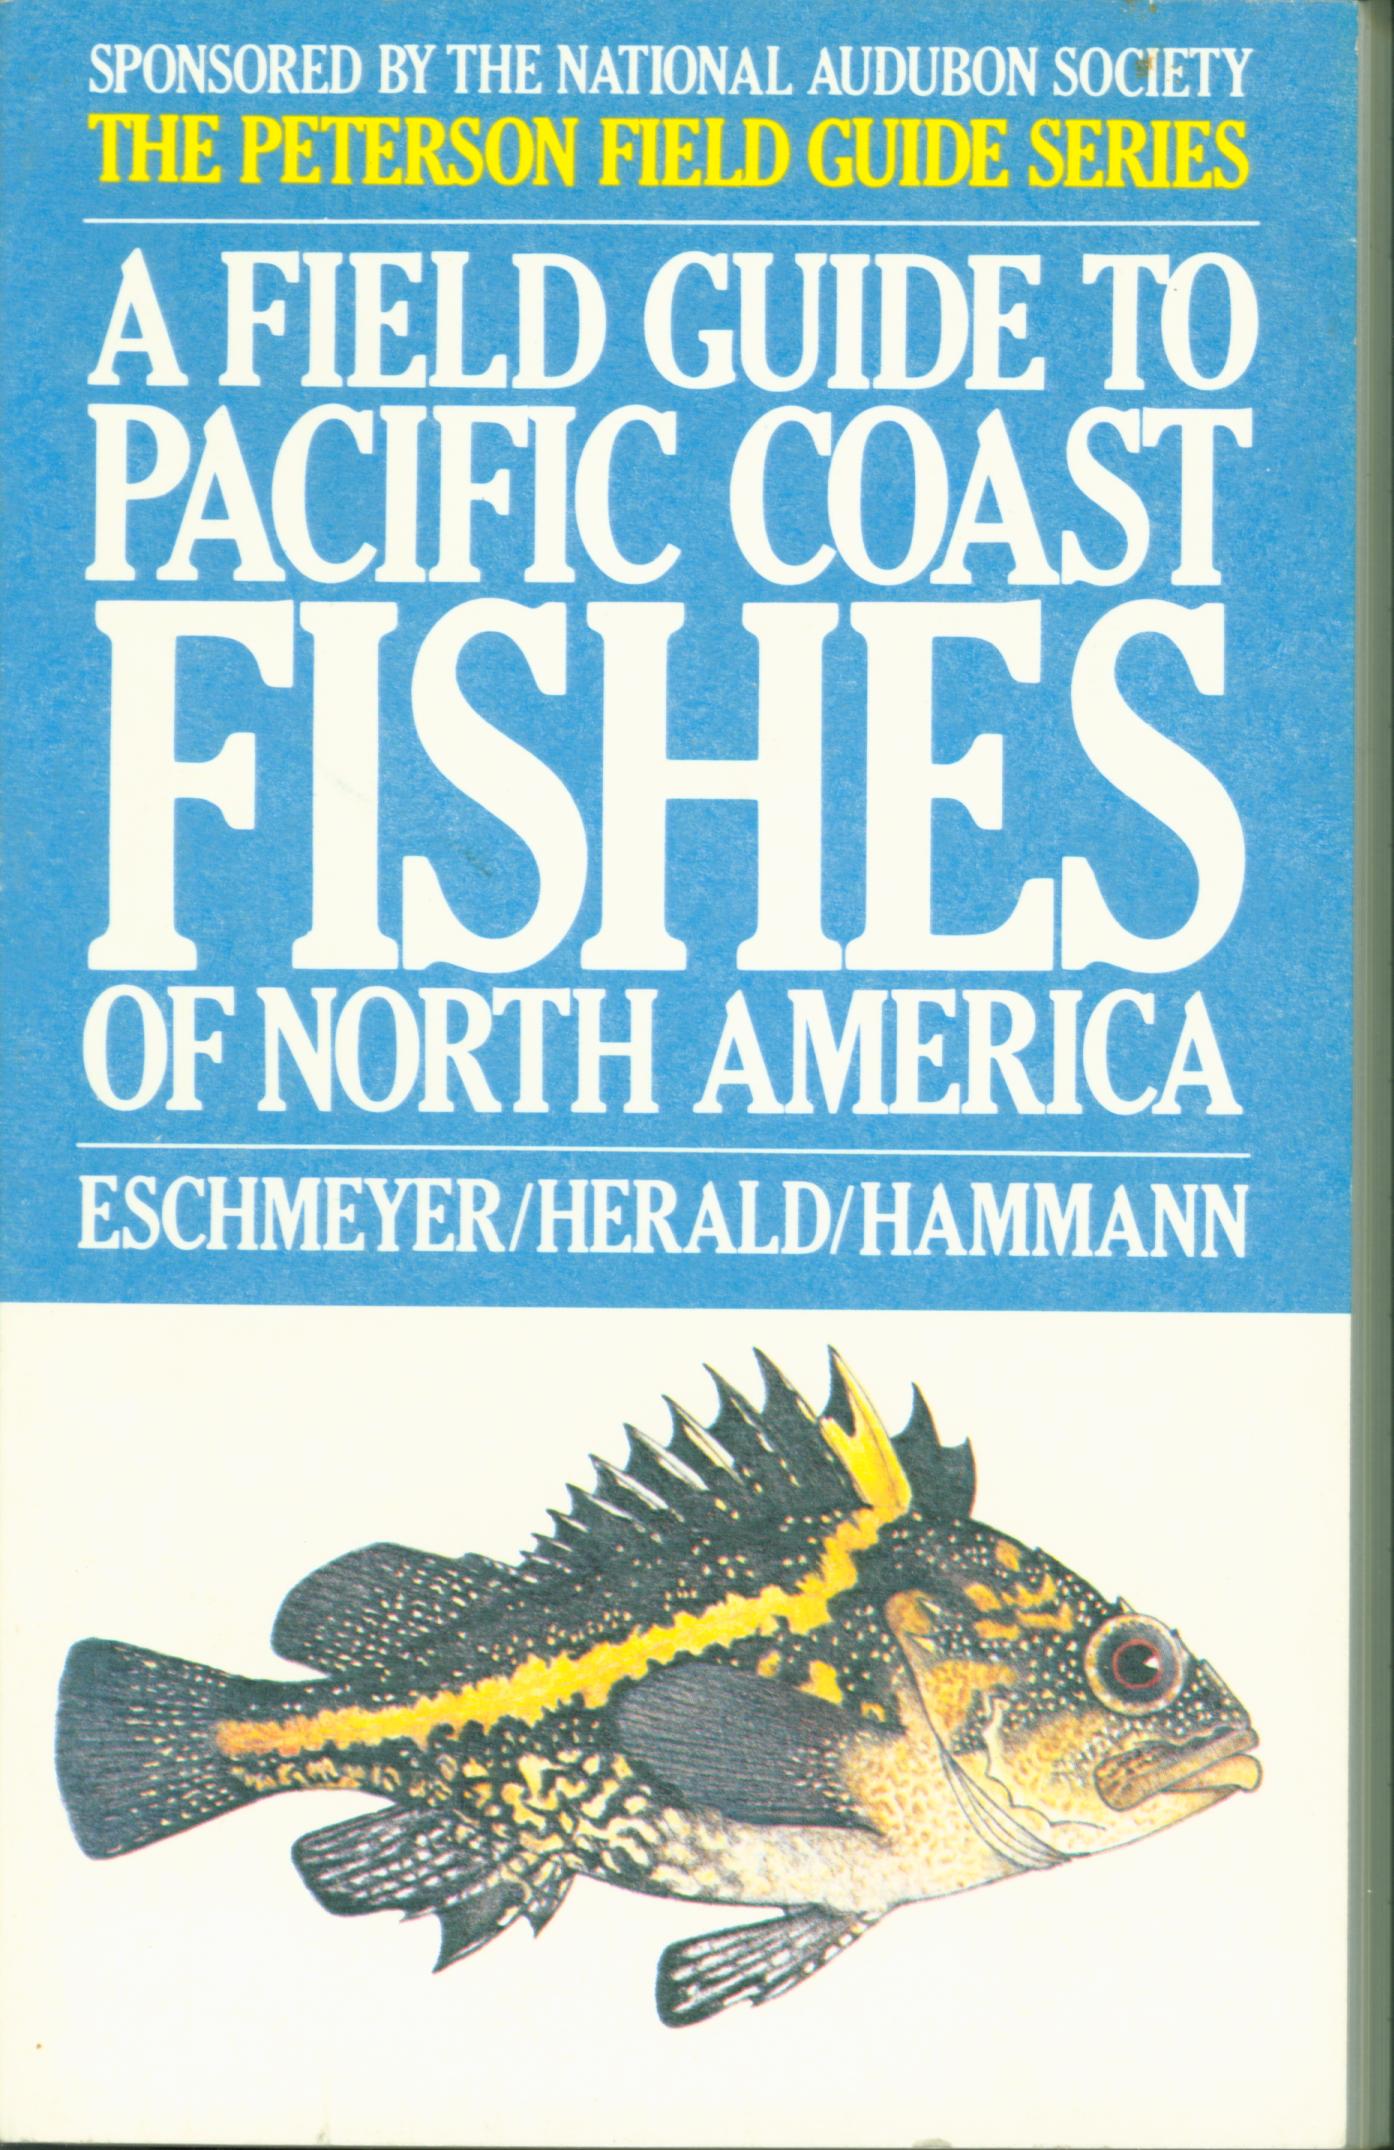 A FIELD GUIDE TO PACIFIC COAST FISHES OF NORTH AMERICA.